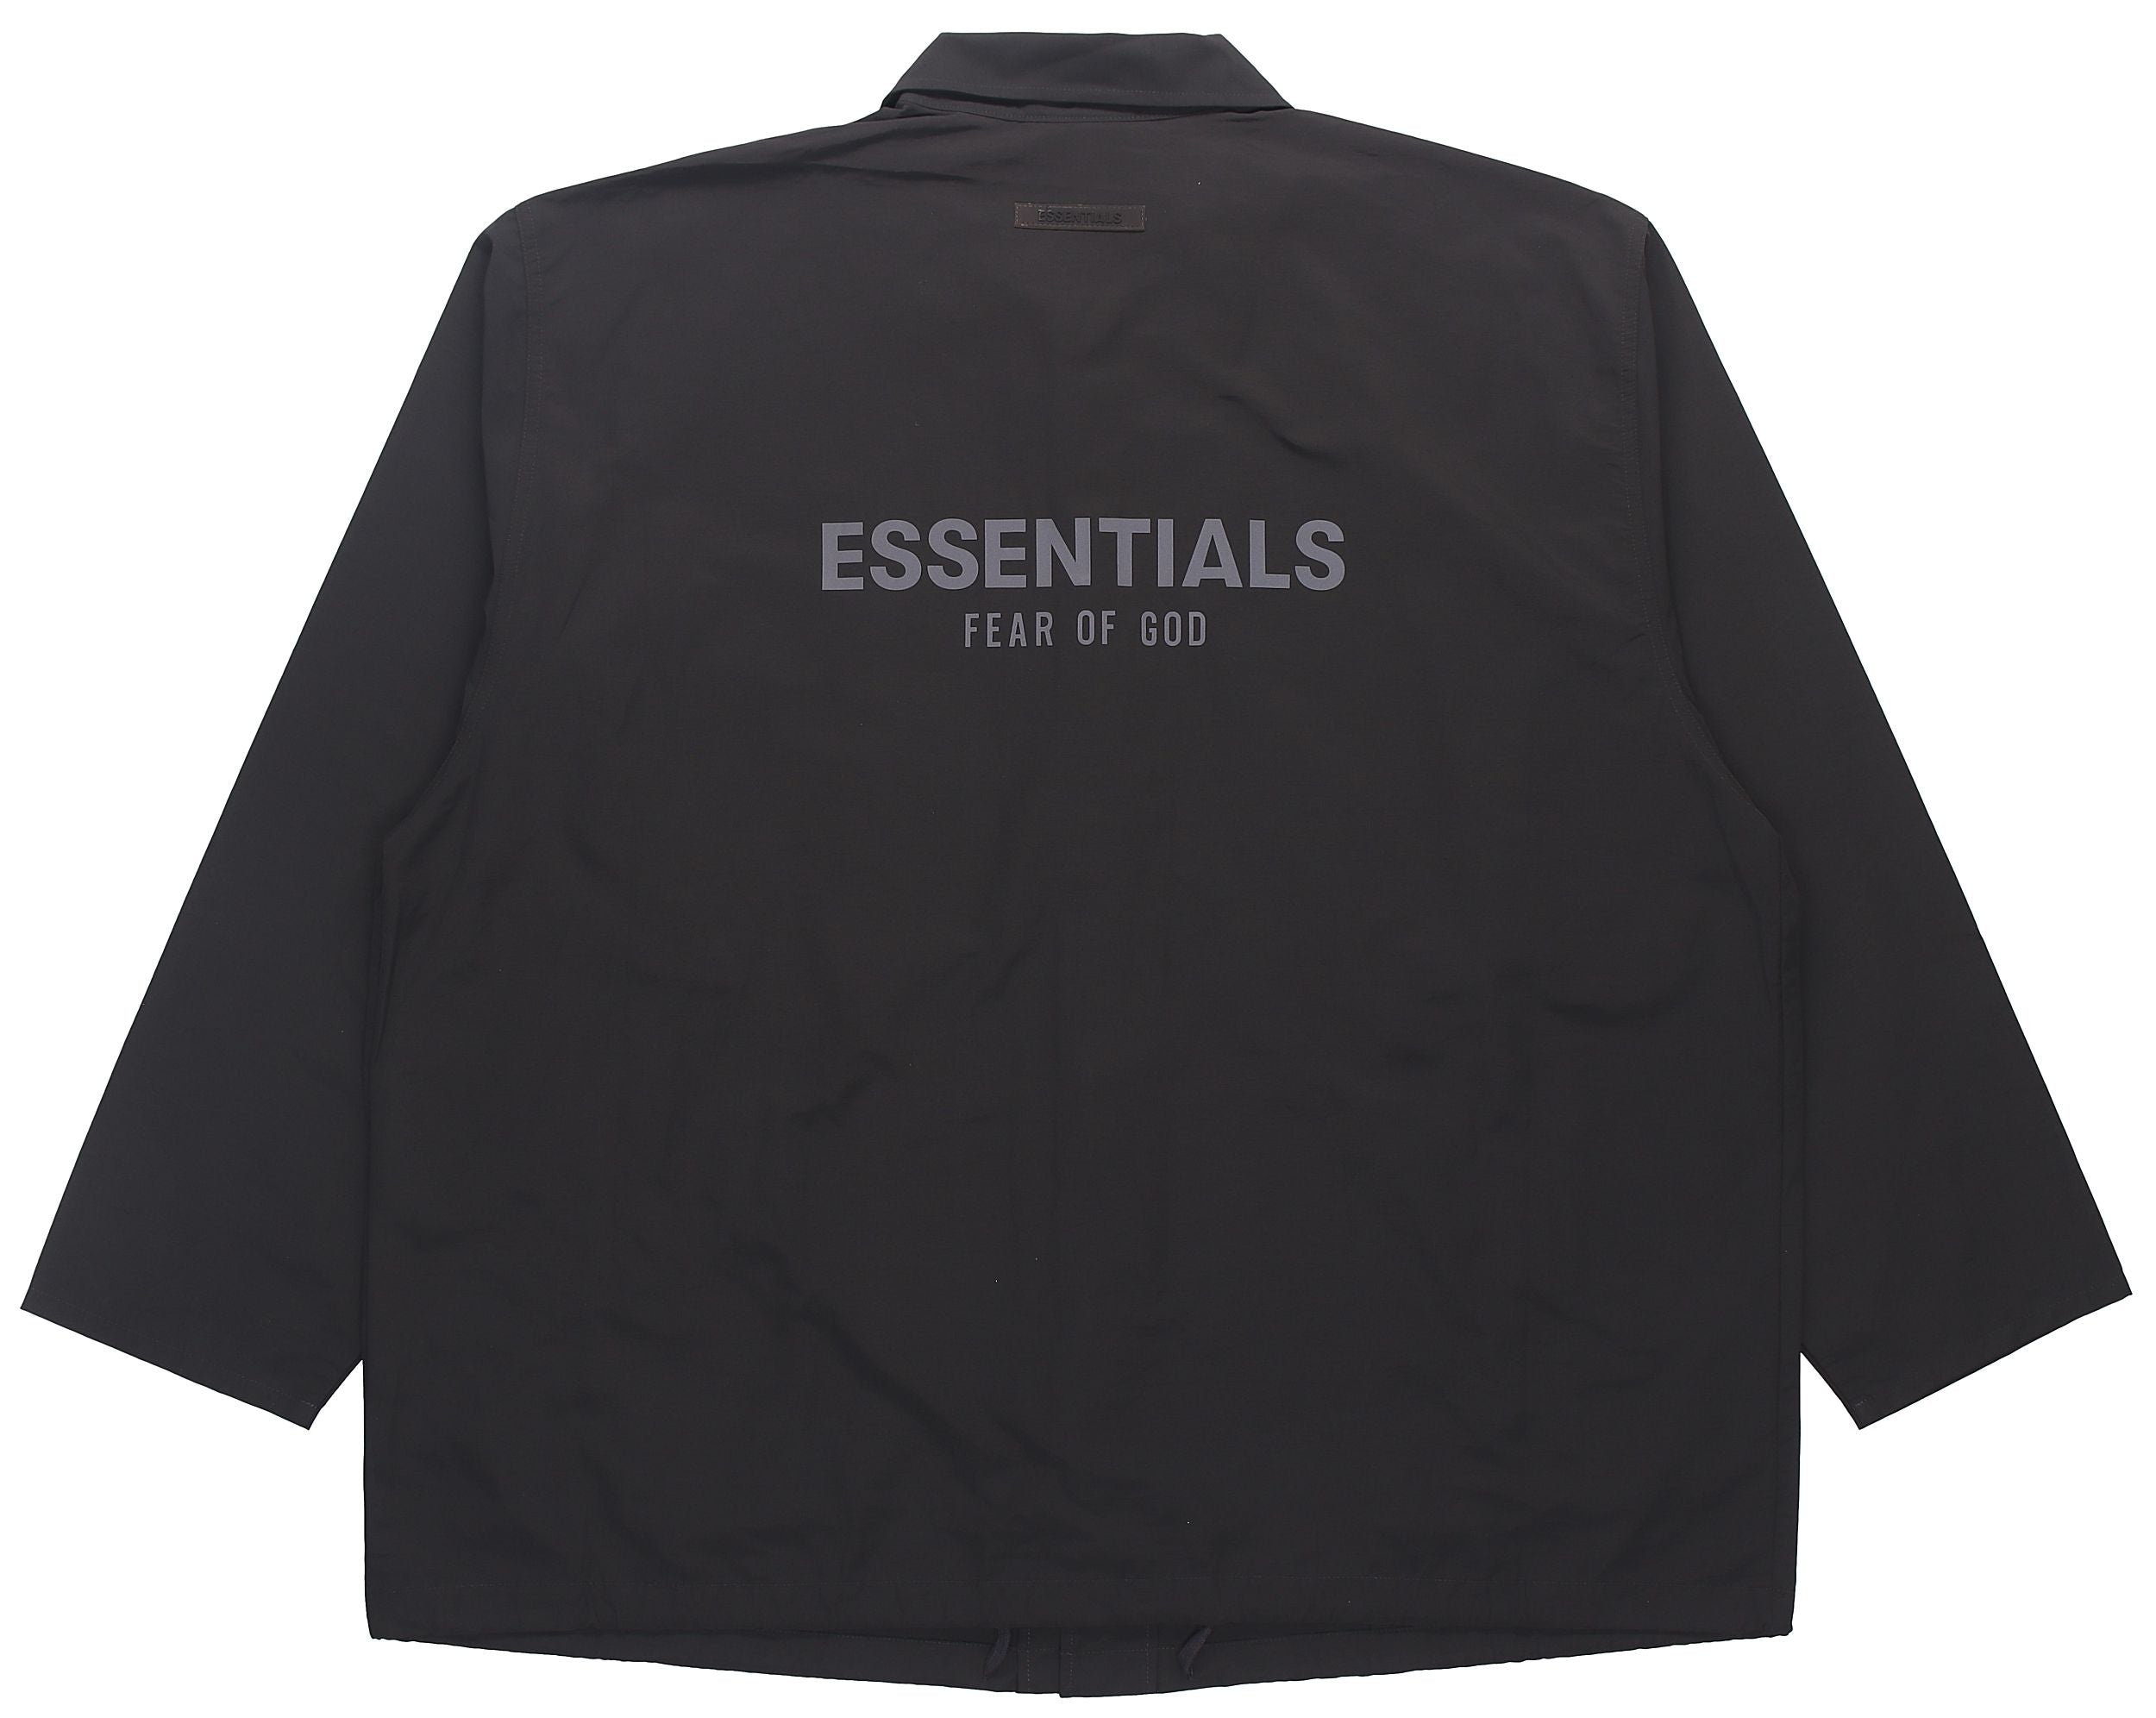 Fear of God Essentials SS21 Coaches Jacket Stretch Limo Black FOG-SS21-628 - 3